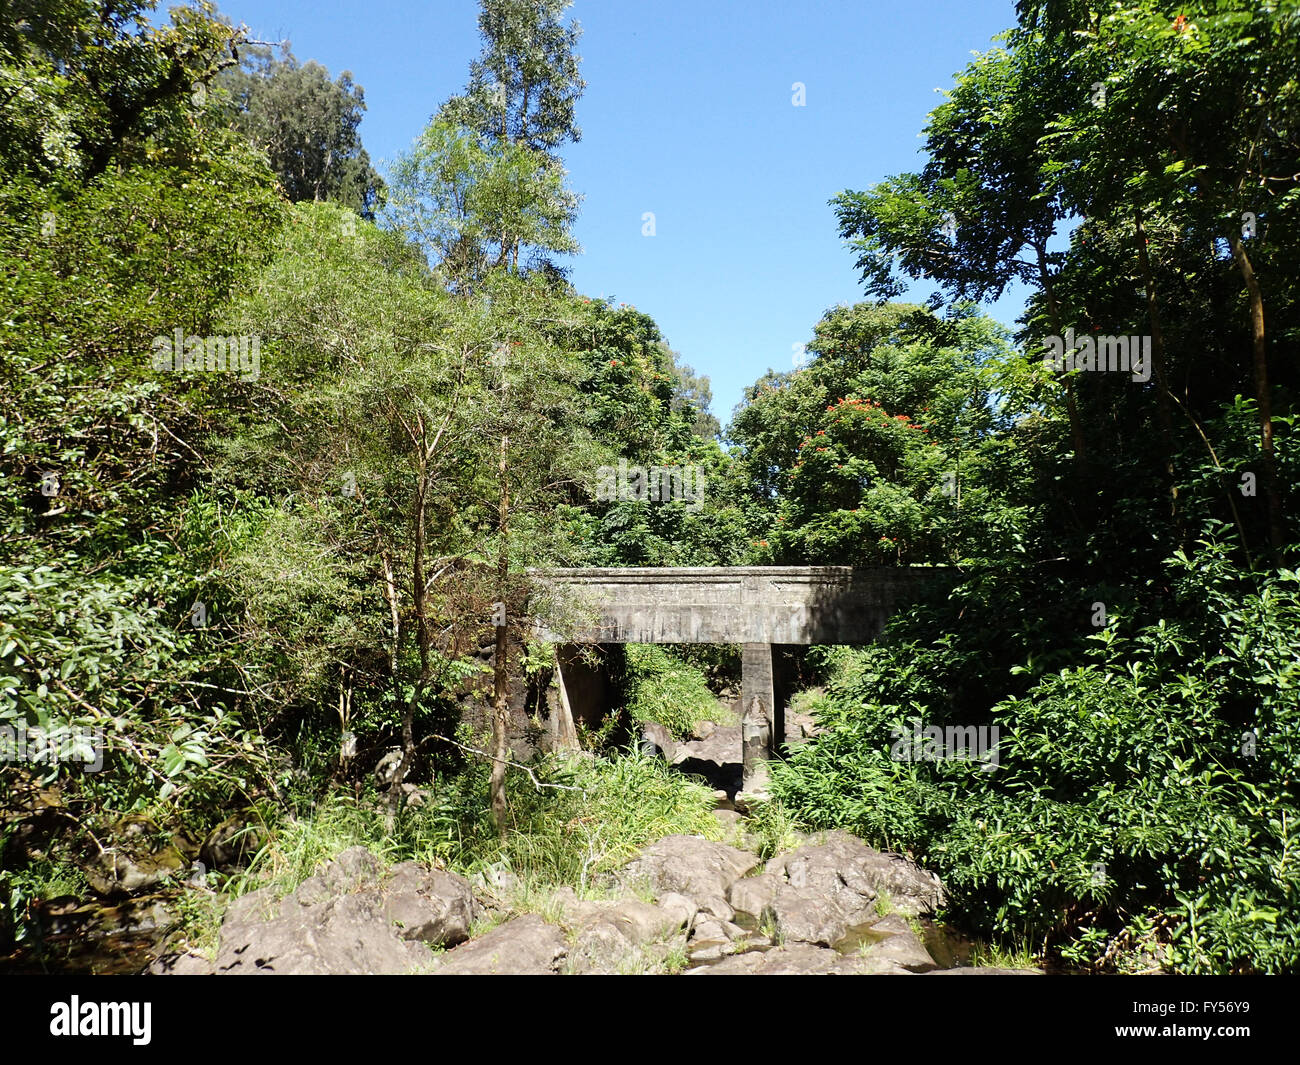 Bridge over small stream in forest in Maui on the Road to Hana. Stock Photo